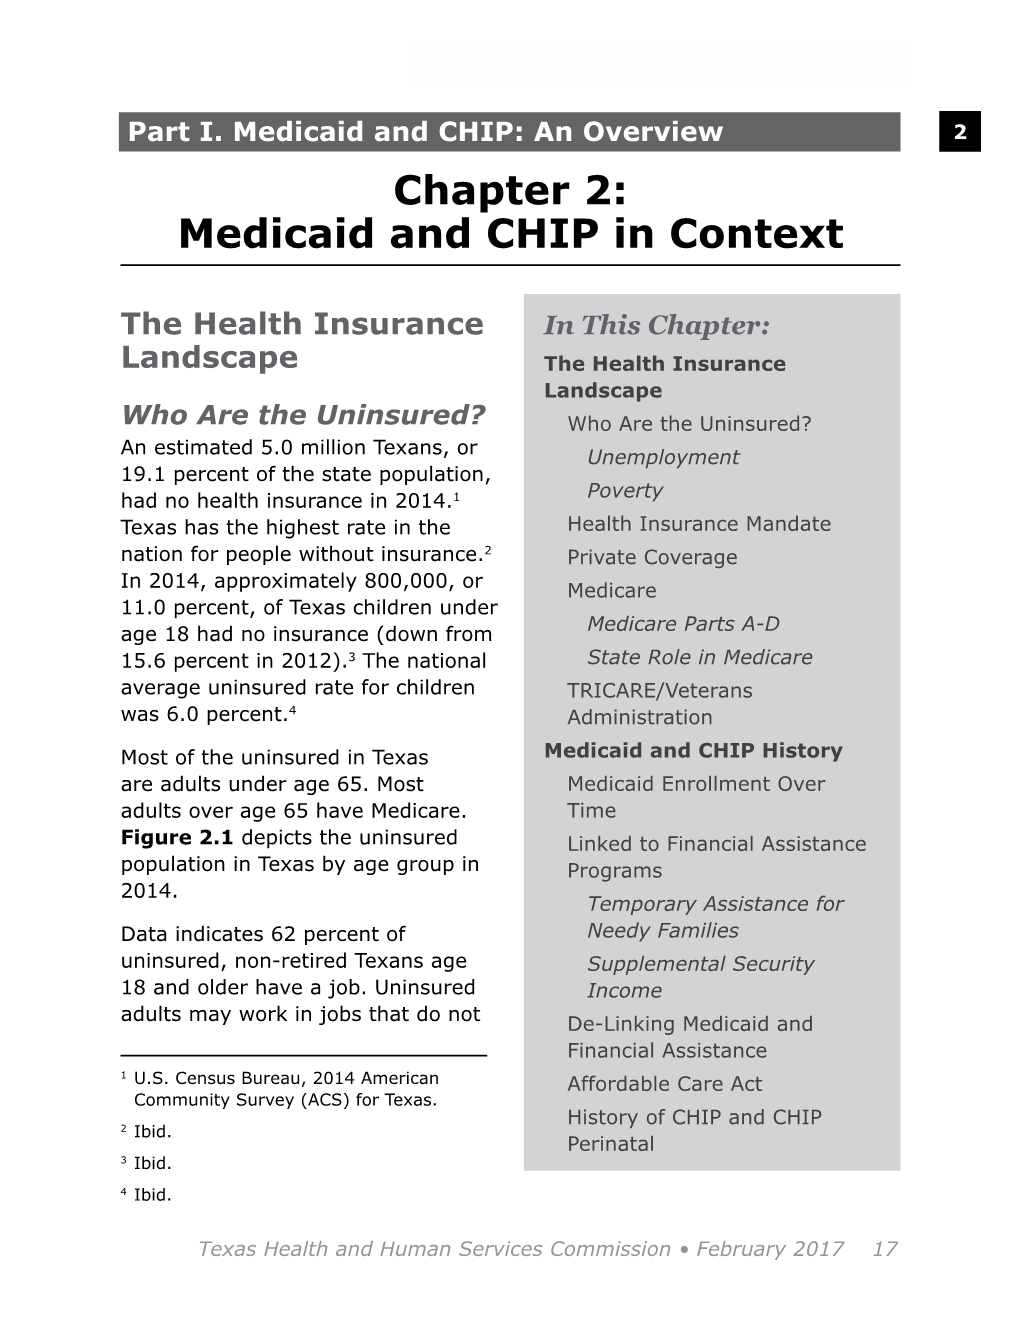 Medicaid and CHIP in Context